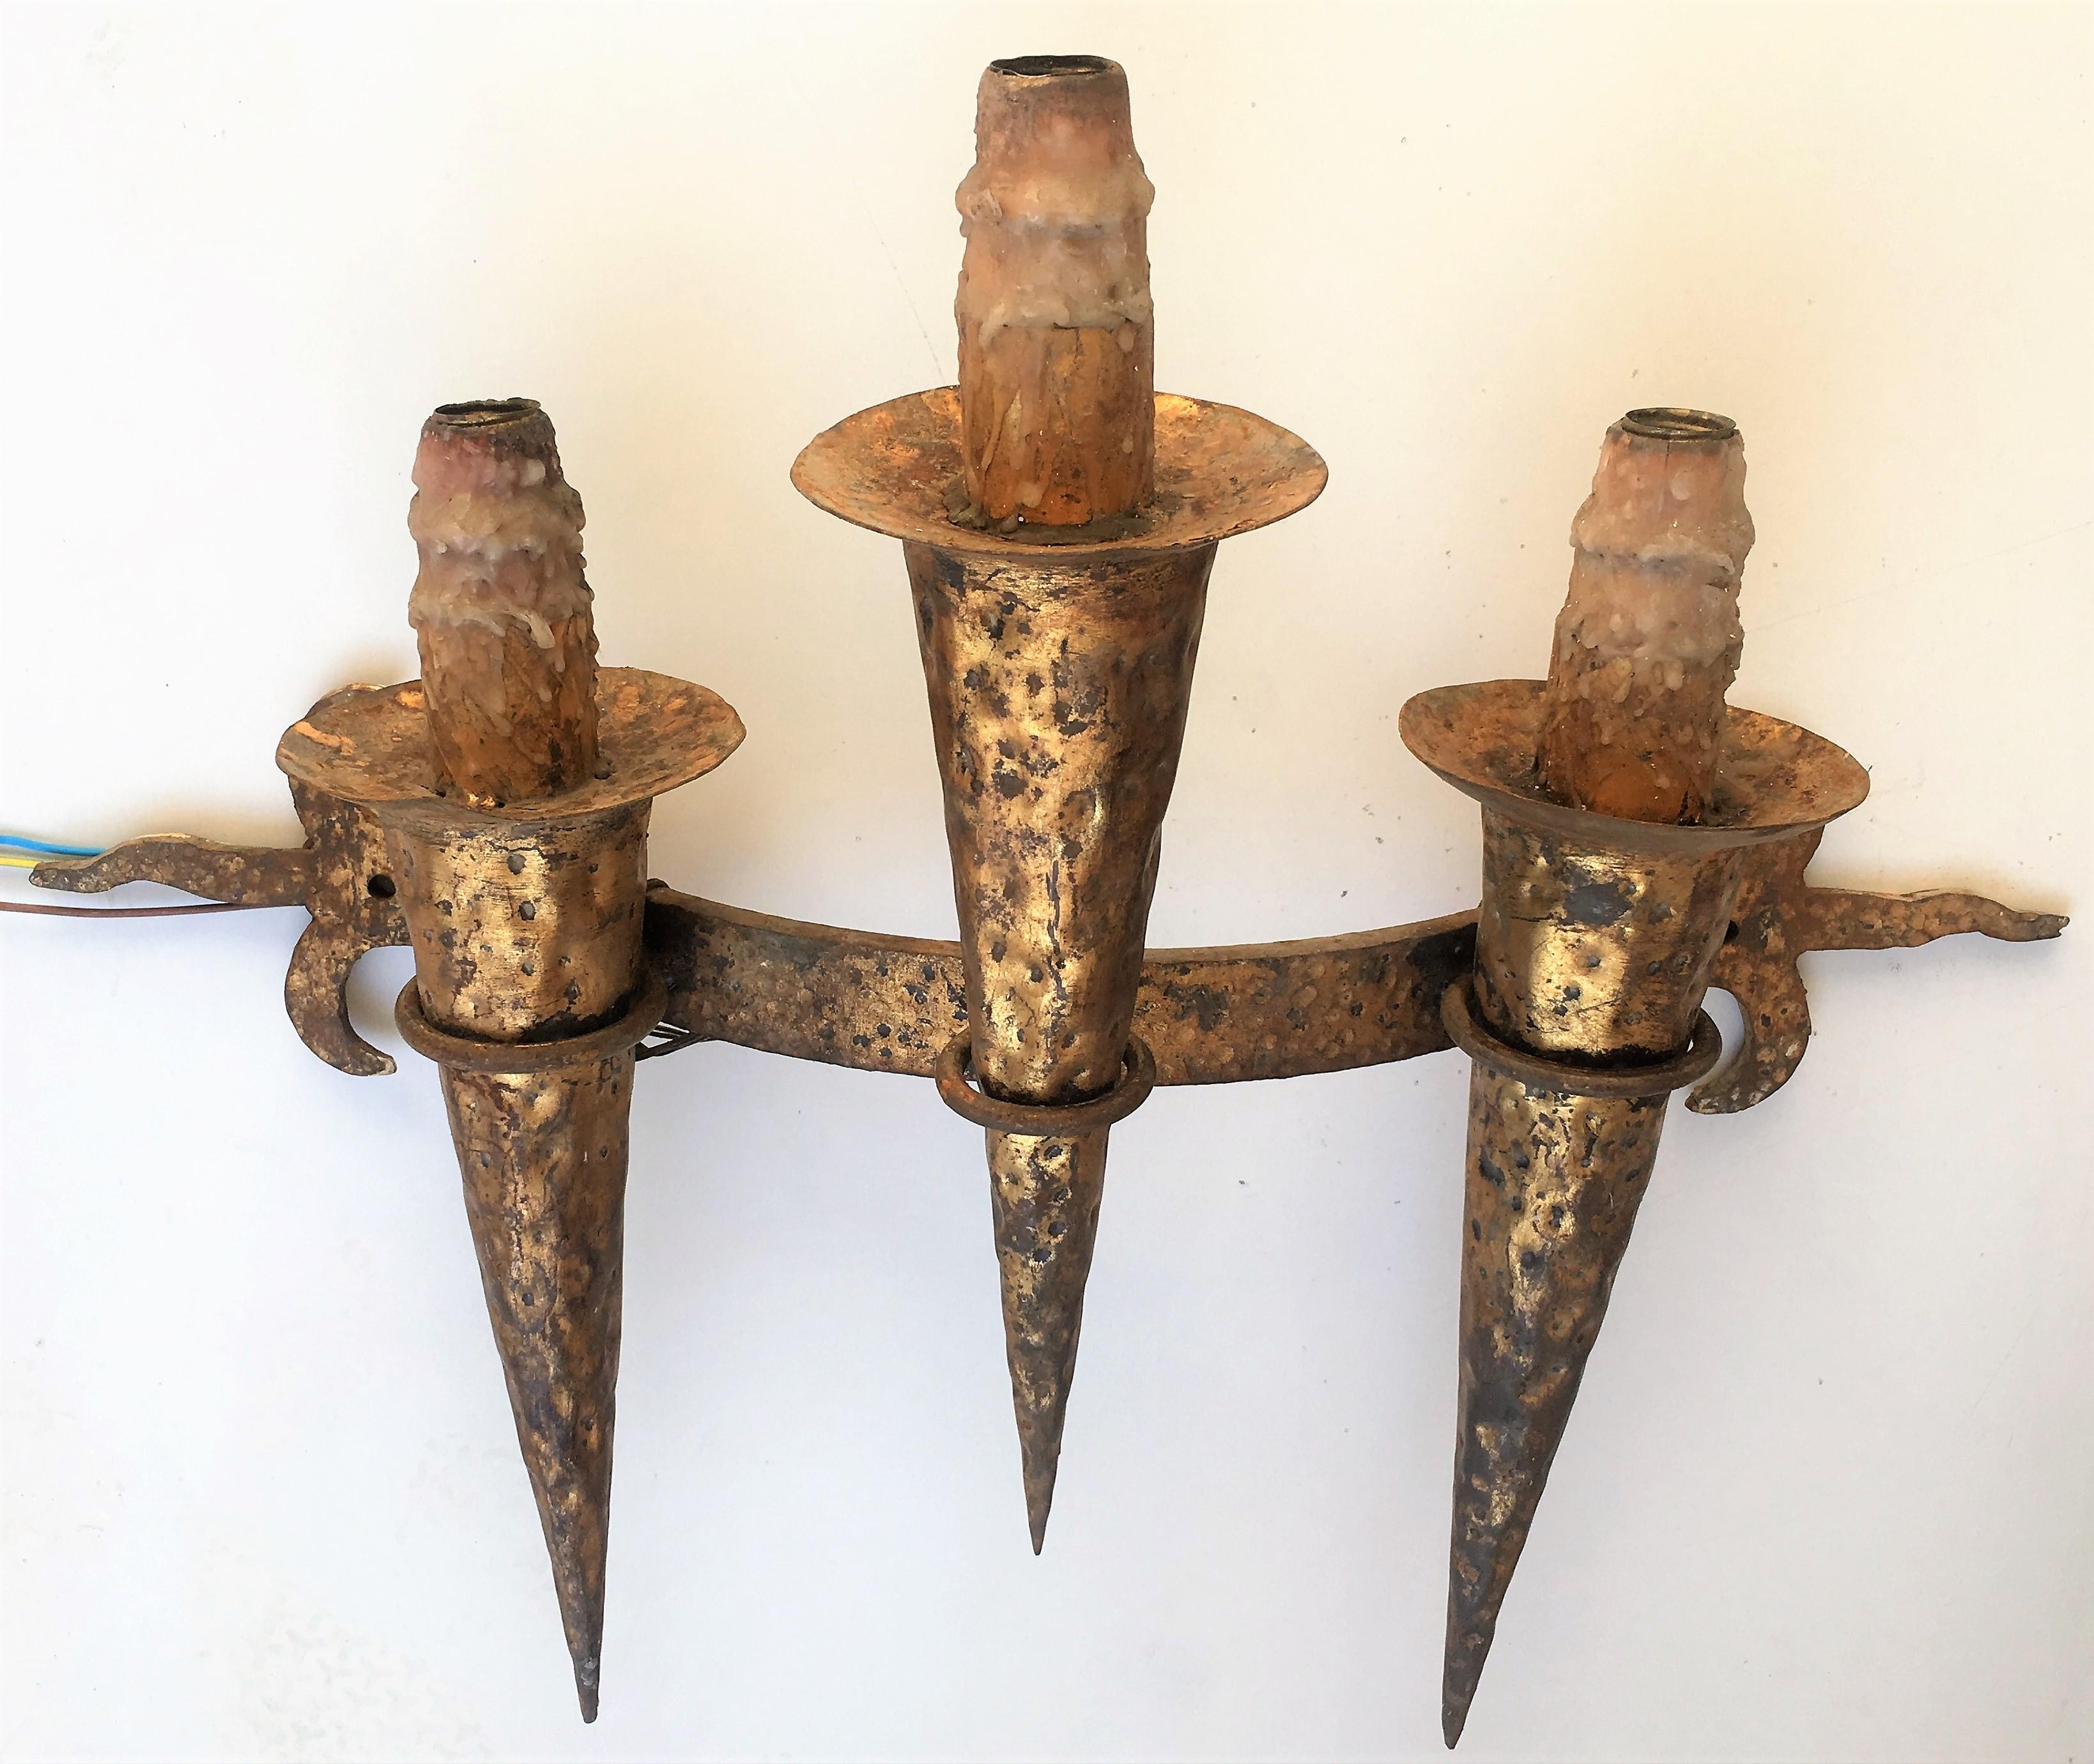 19th century set of six huge Spanish handmade gothic wrought iron and candle torch sconces with three lights each.
   